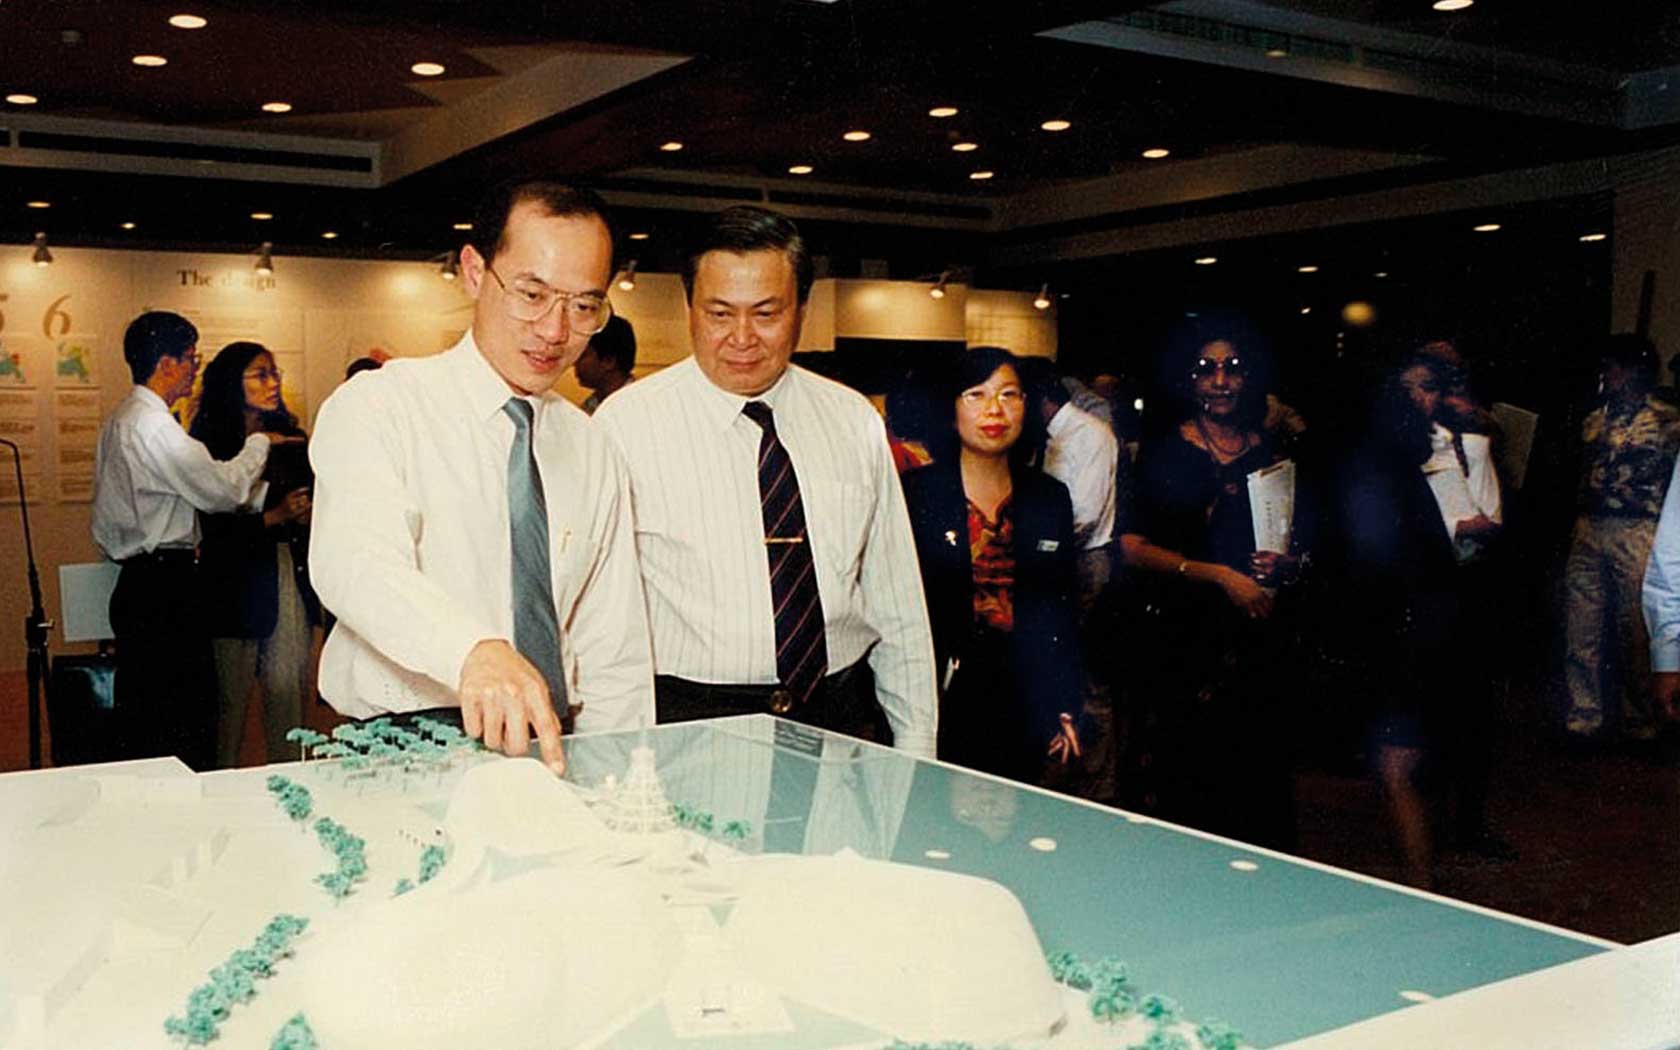 Image of Minister for Information and the Arts George Yeo and Robert Lau looking at the building design prototype of Esplanade.